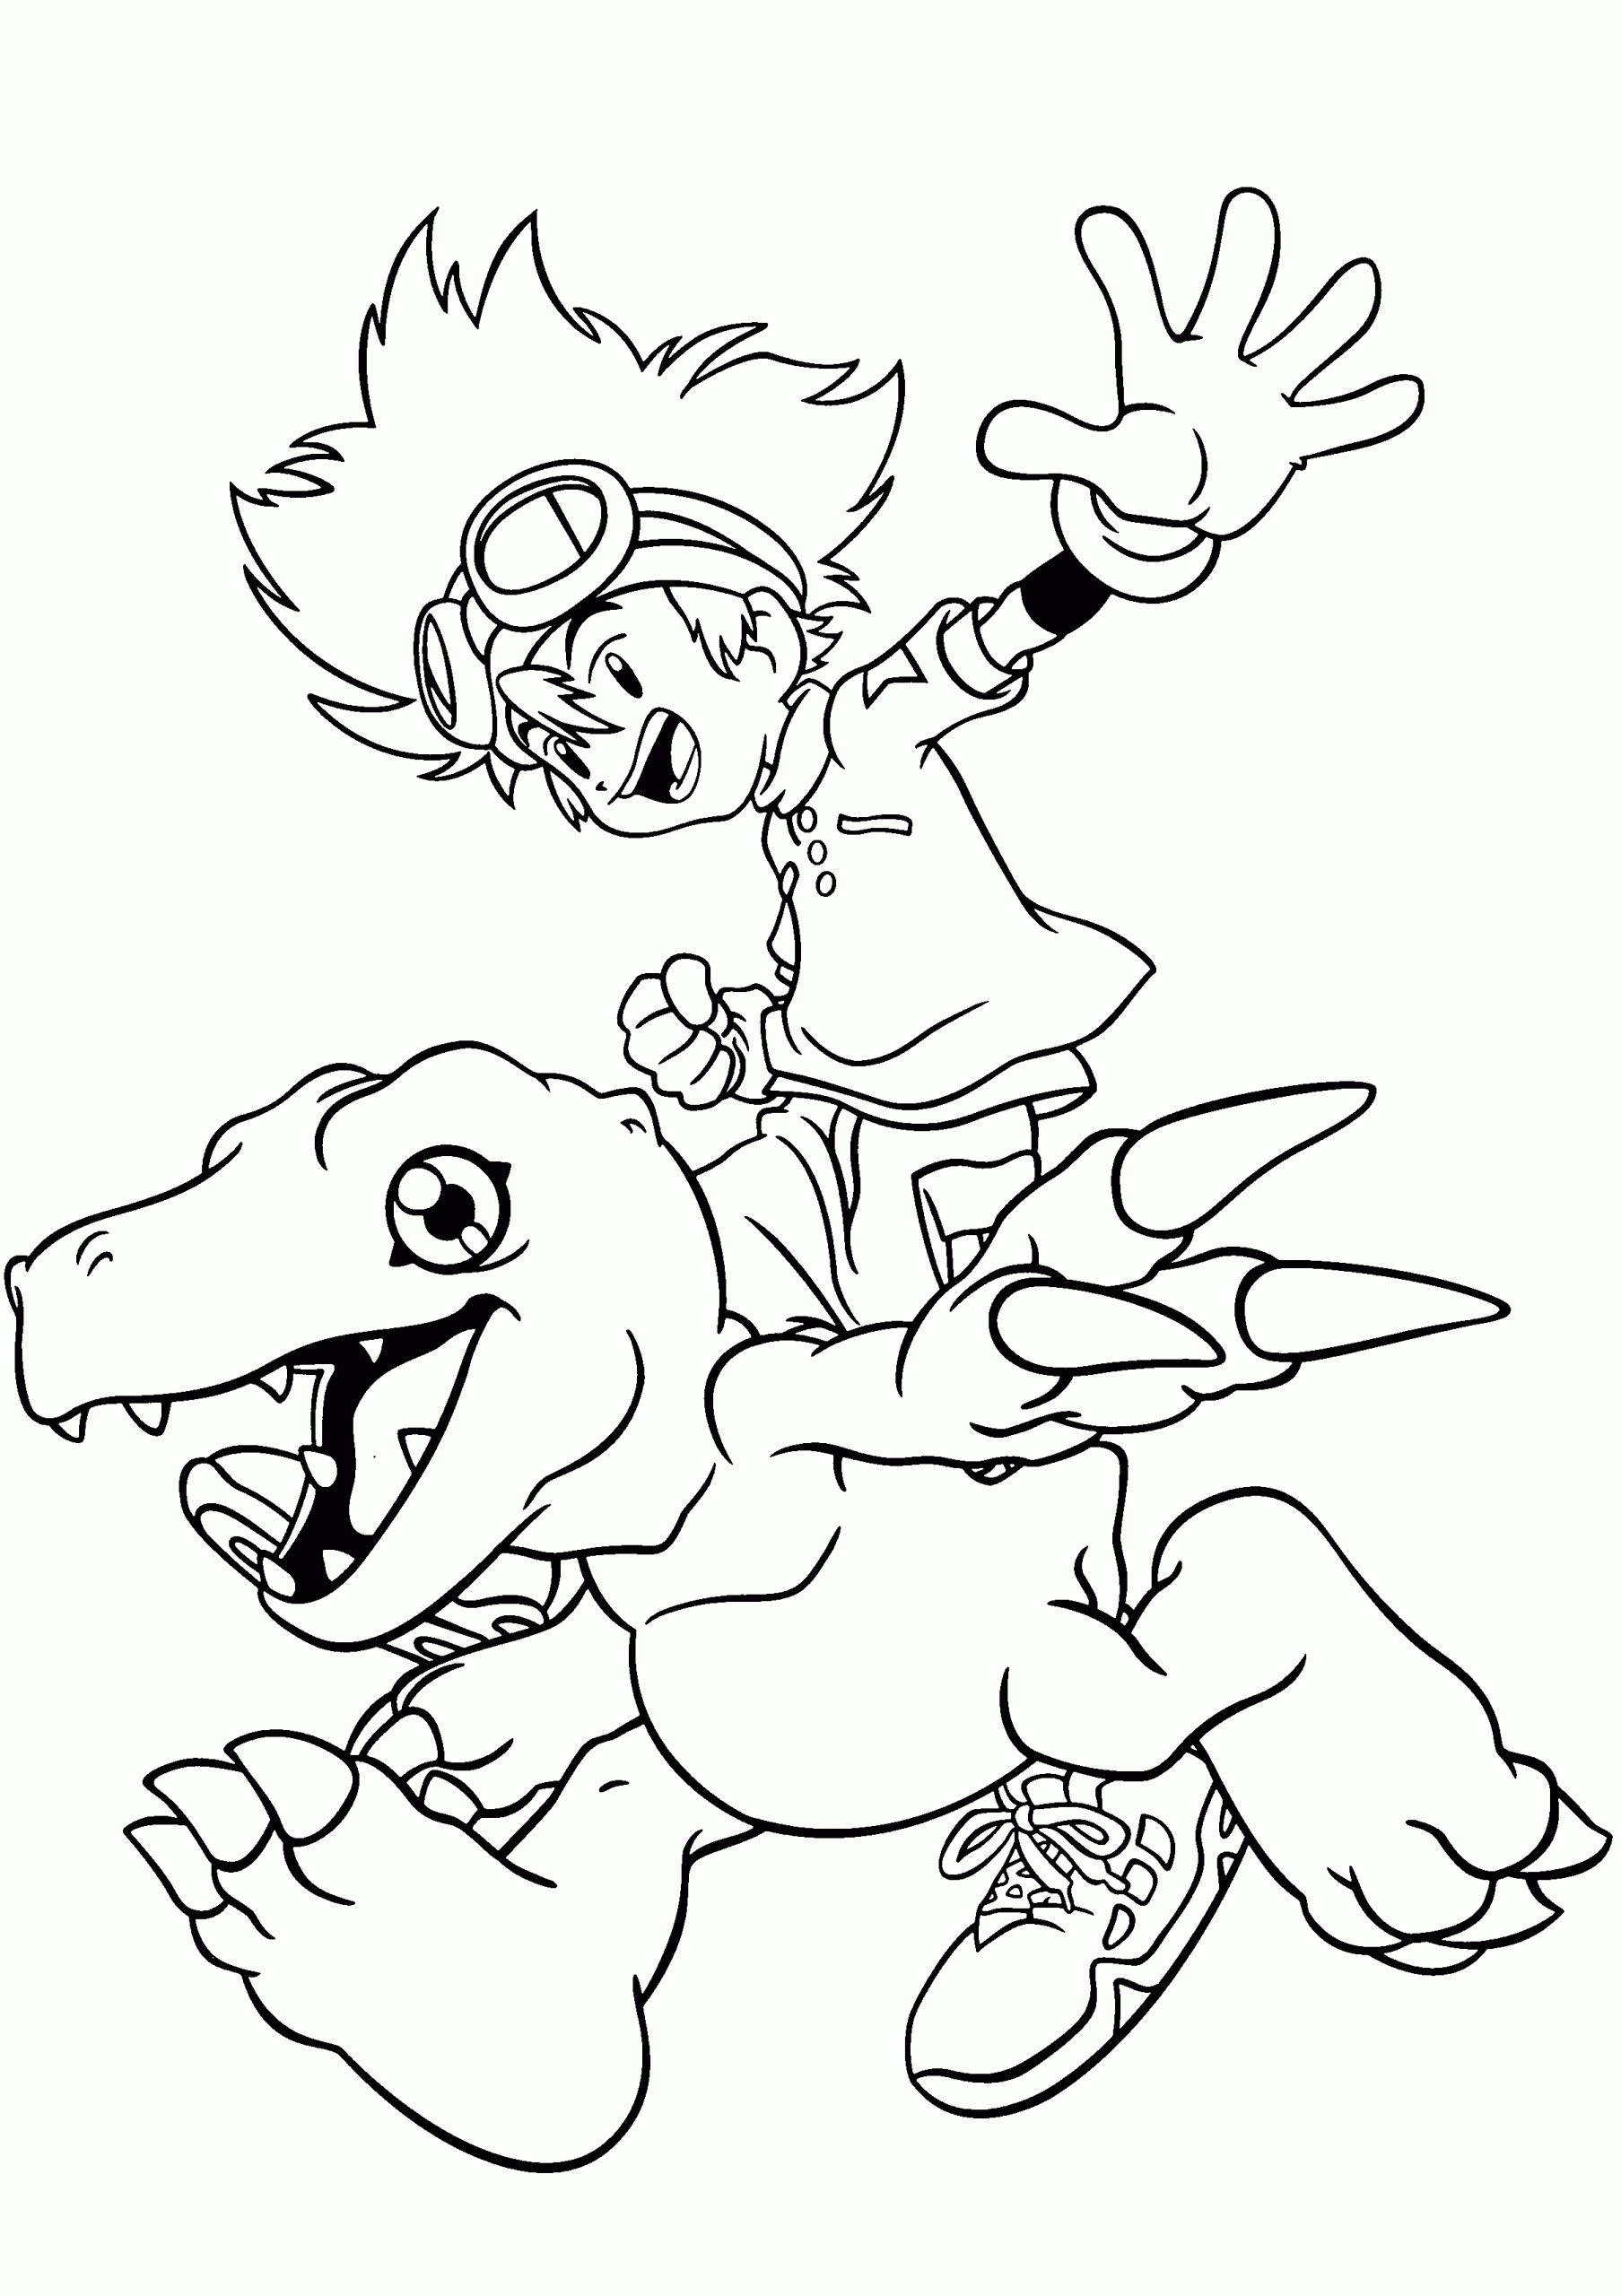 Coloring Pages For Teenagers Printable Free
 Free Printable Digimon Coloring Pages For Kids